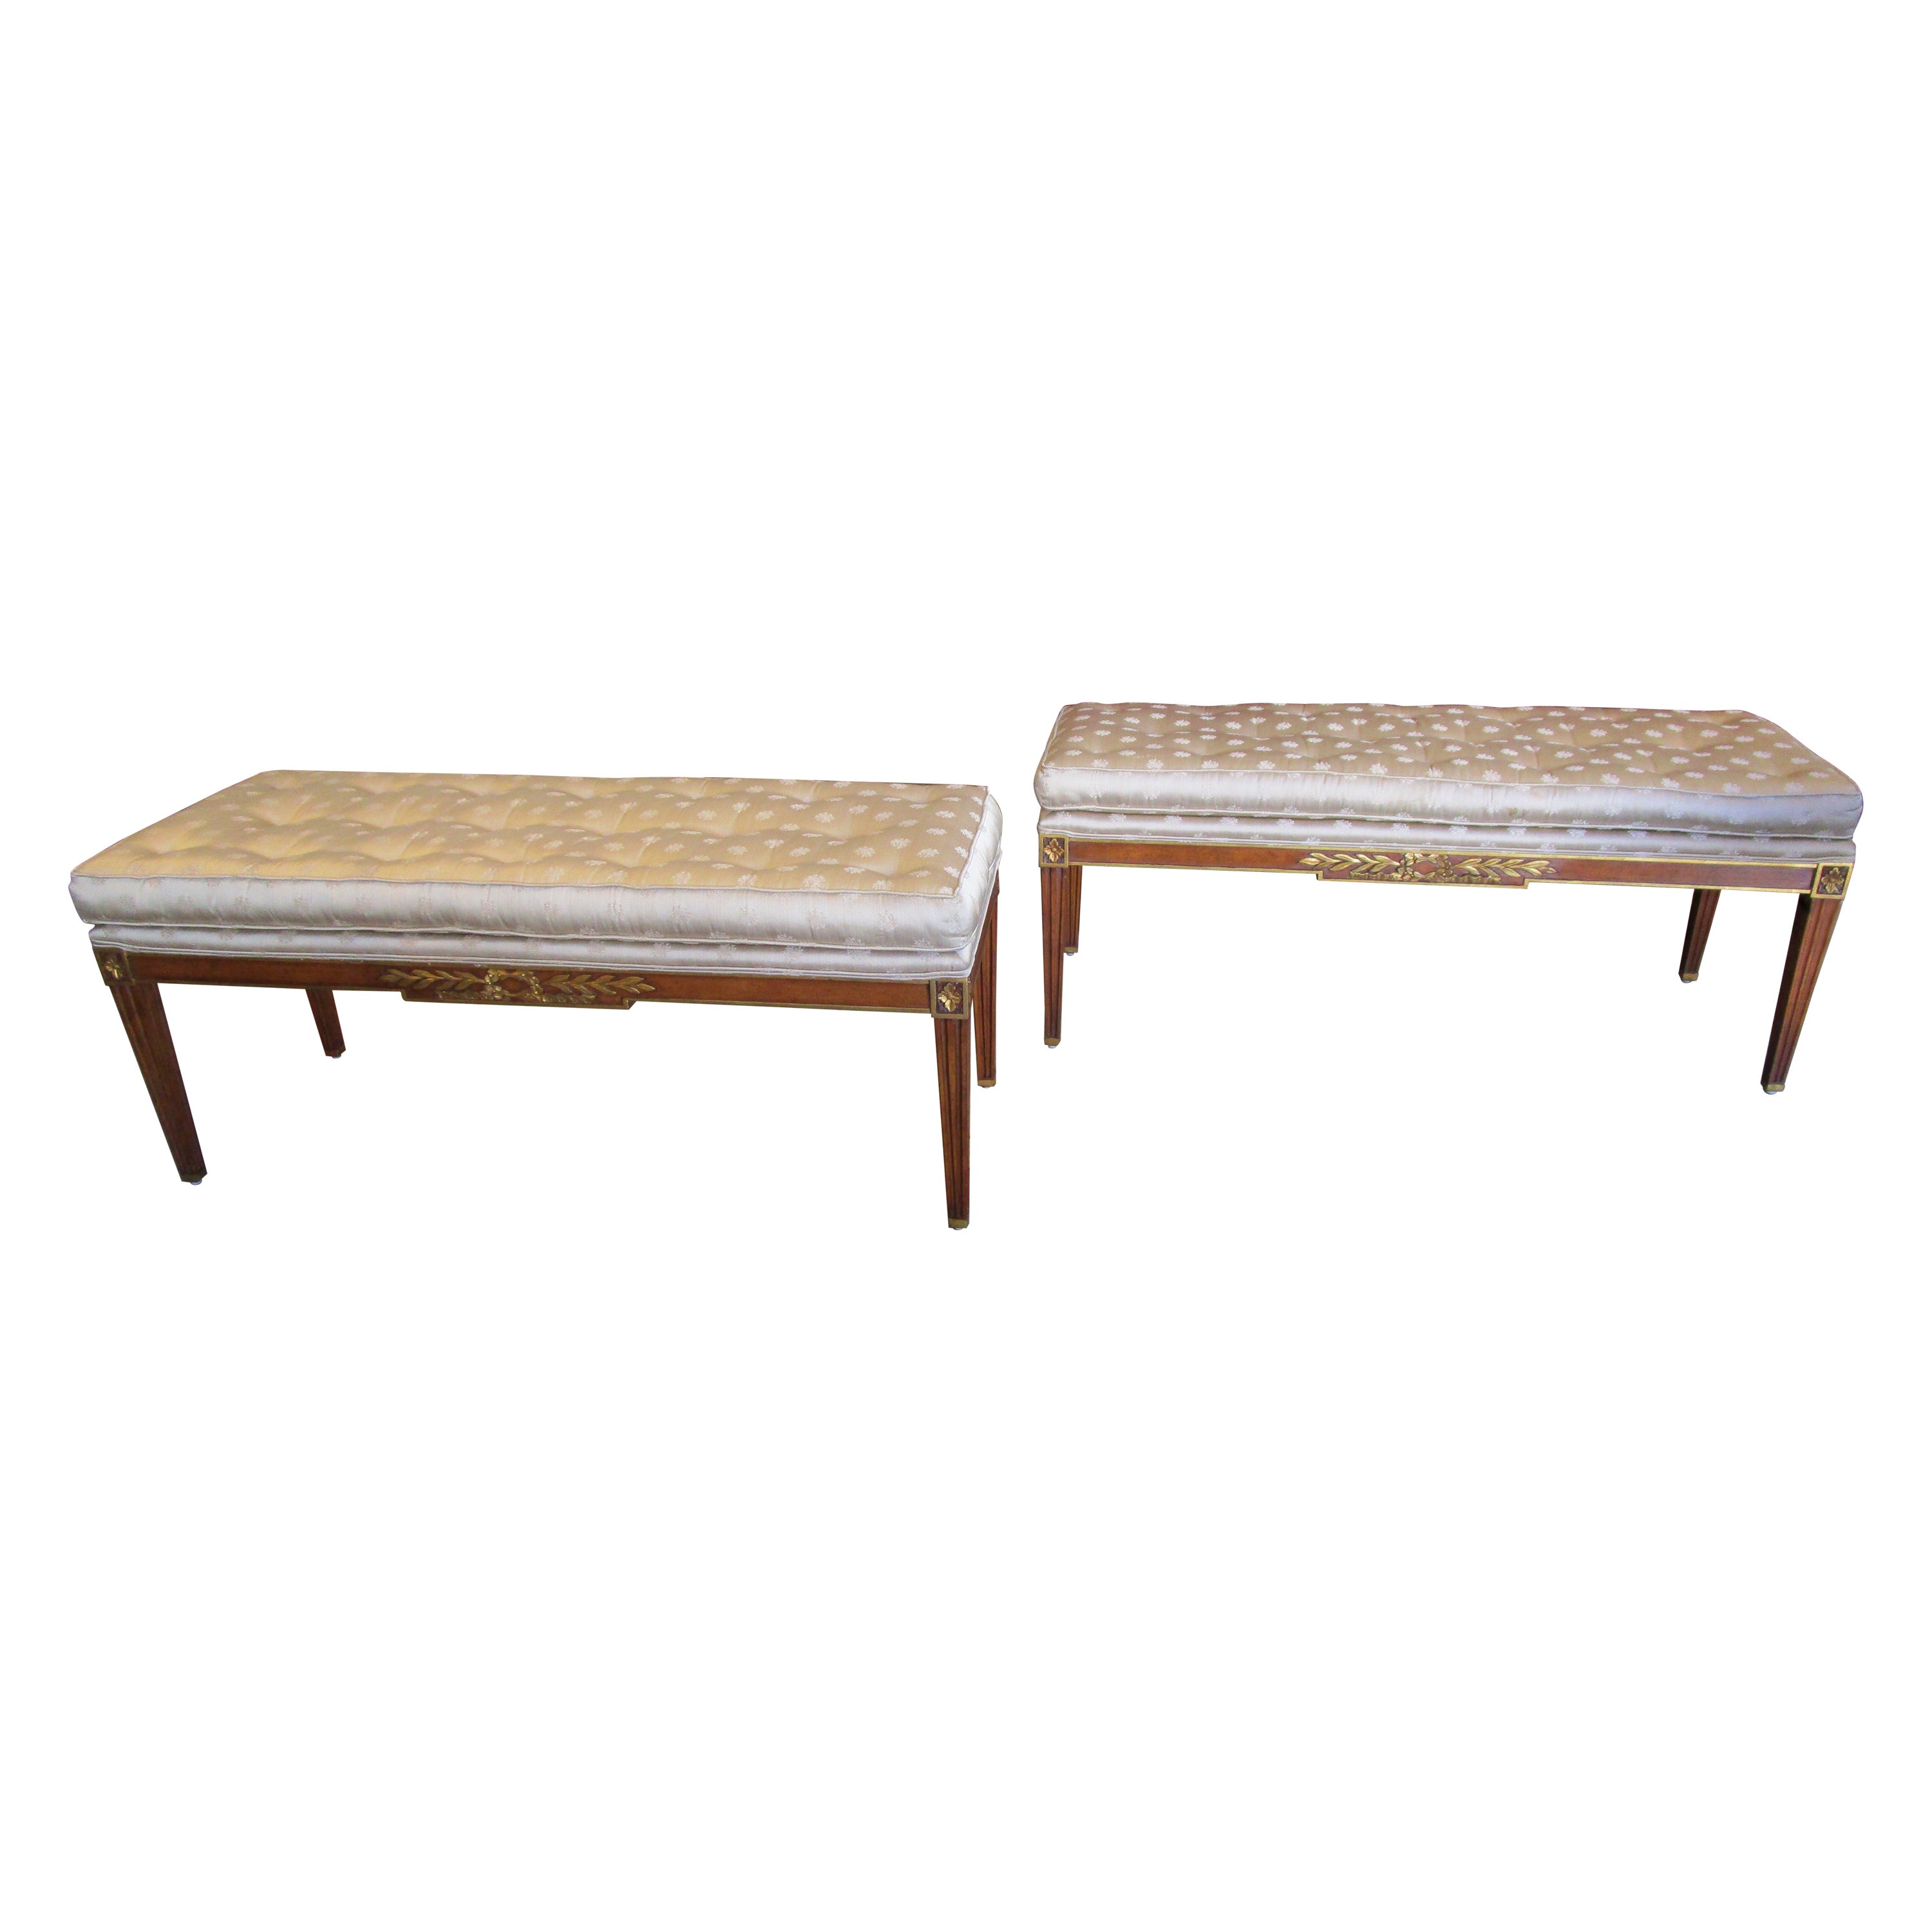 Fine Pair of Late 19th Century to Early 20th C Empire Parcel Gilt Benches